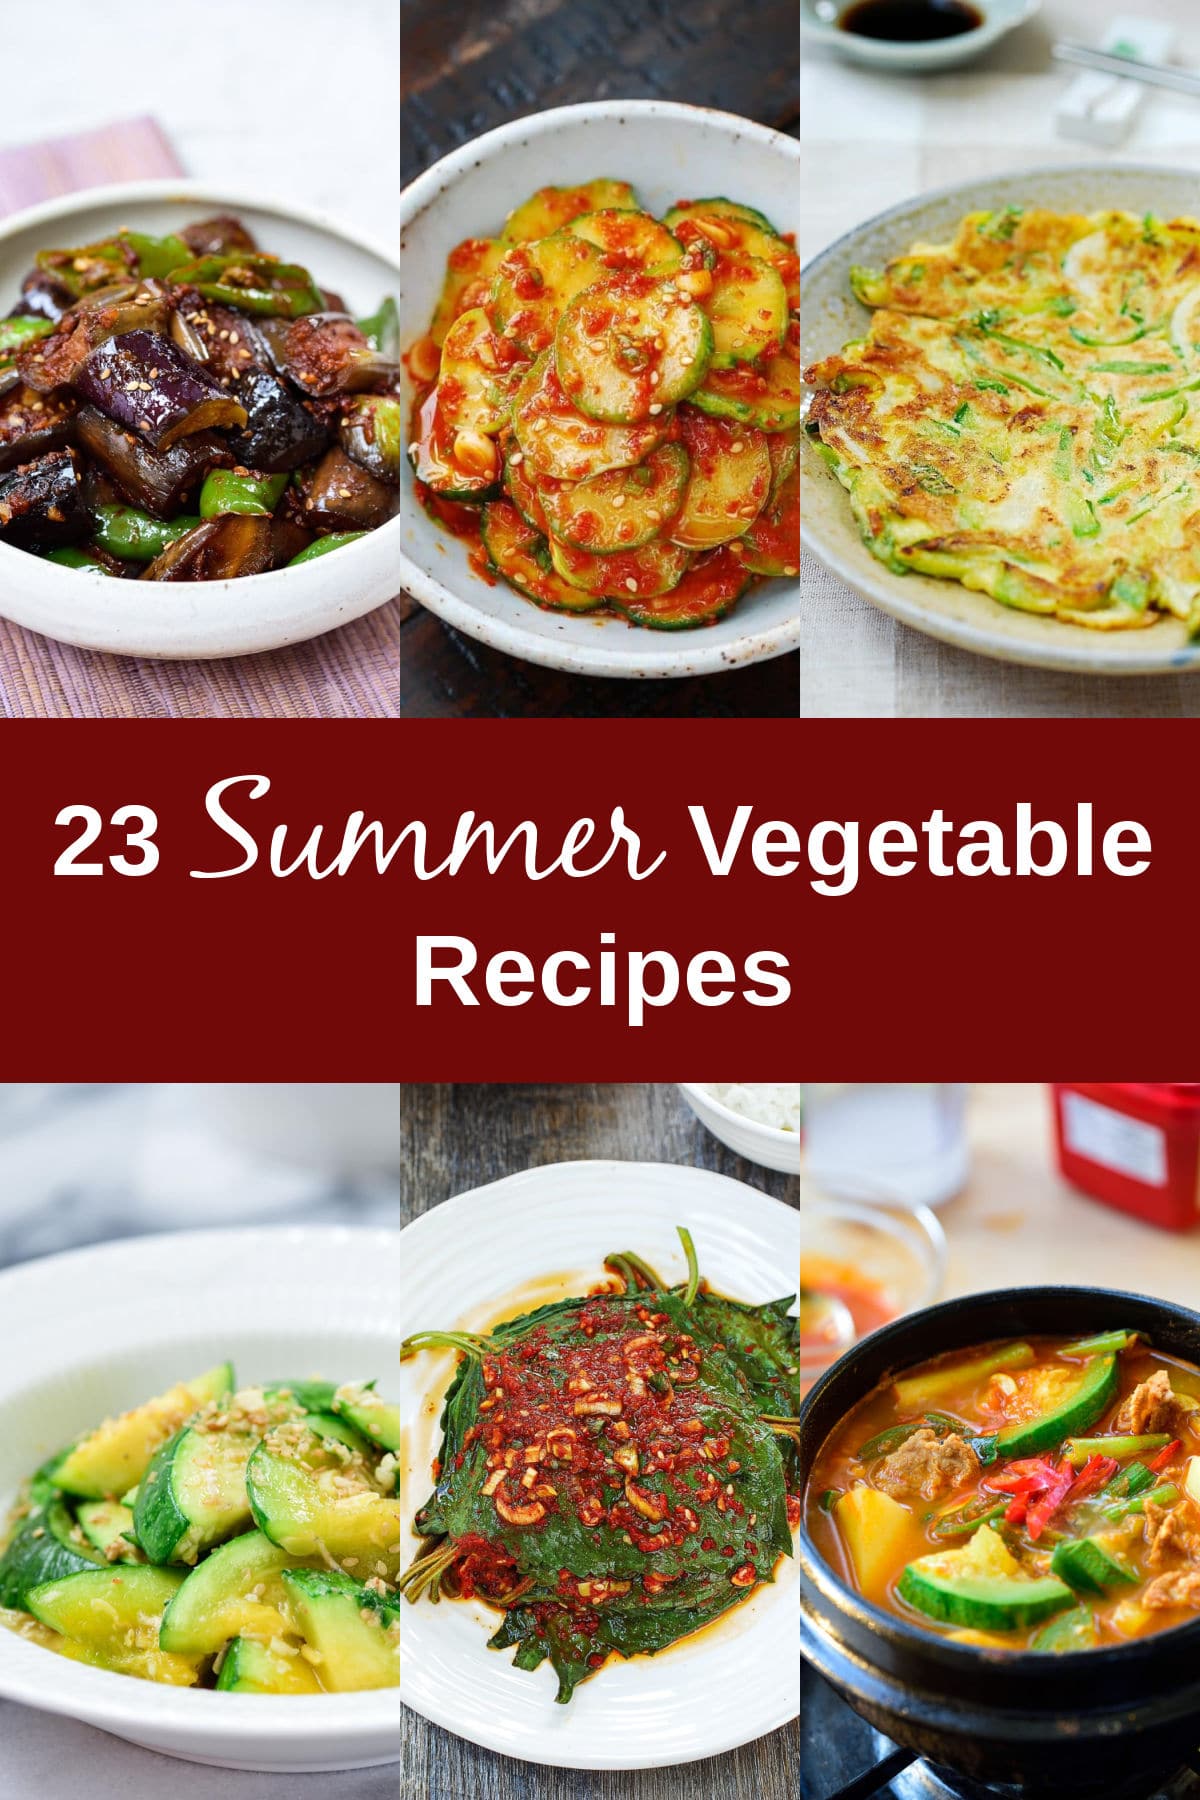 4 x 6 in copy 2 - 23 Summer vegetable recipes